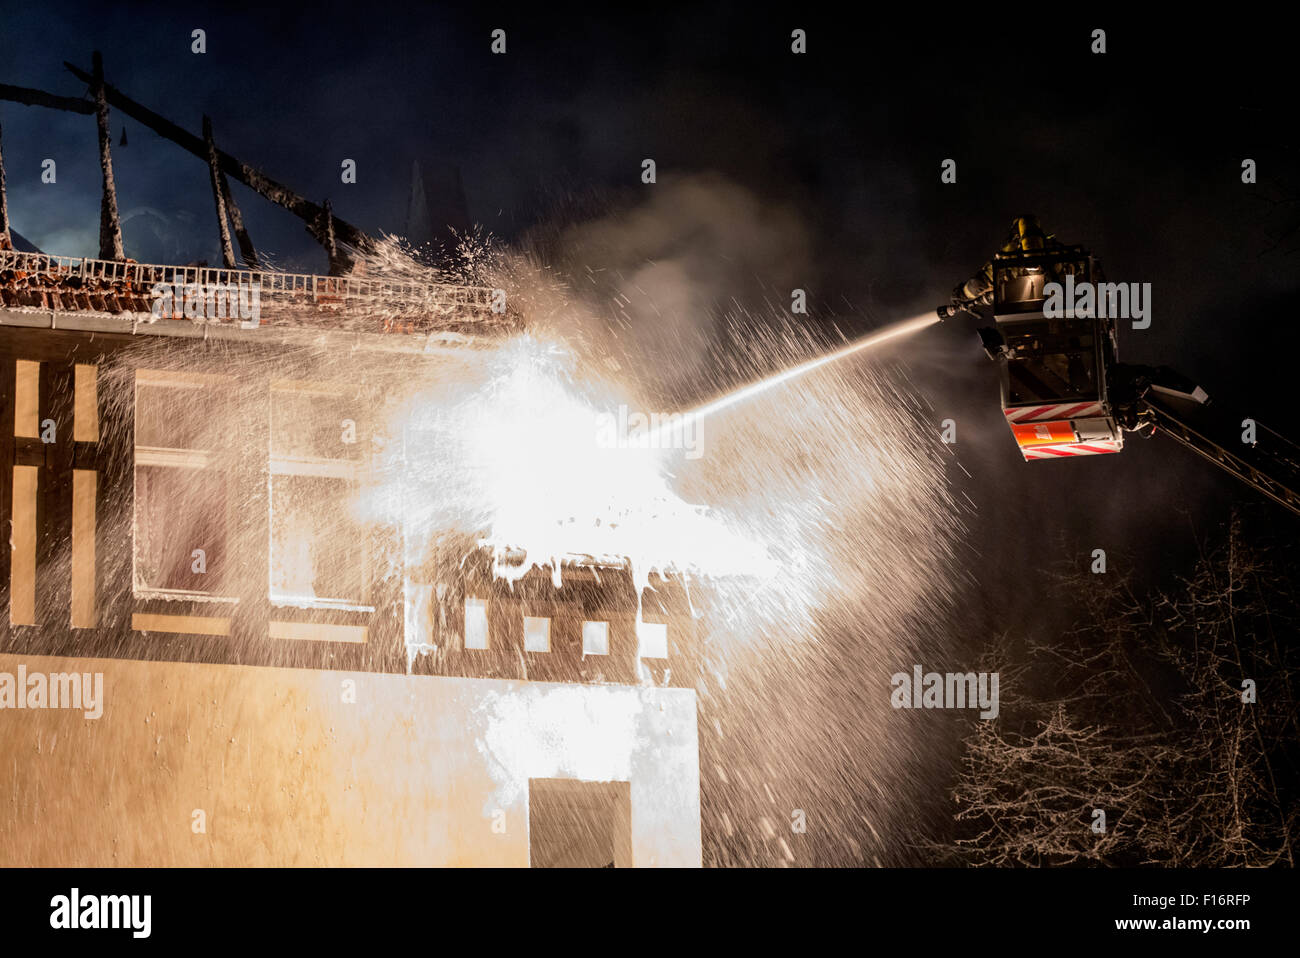 Berlin, Germany, unloading, the fire department with a roof fire Stock Photo